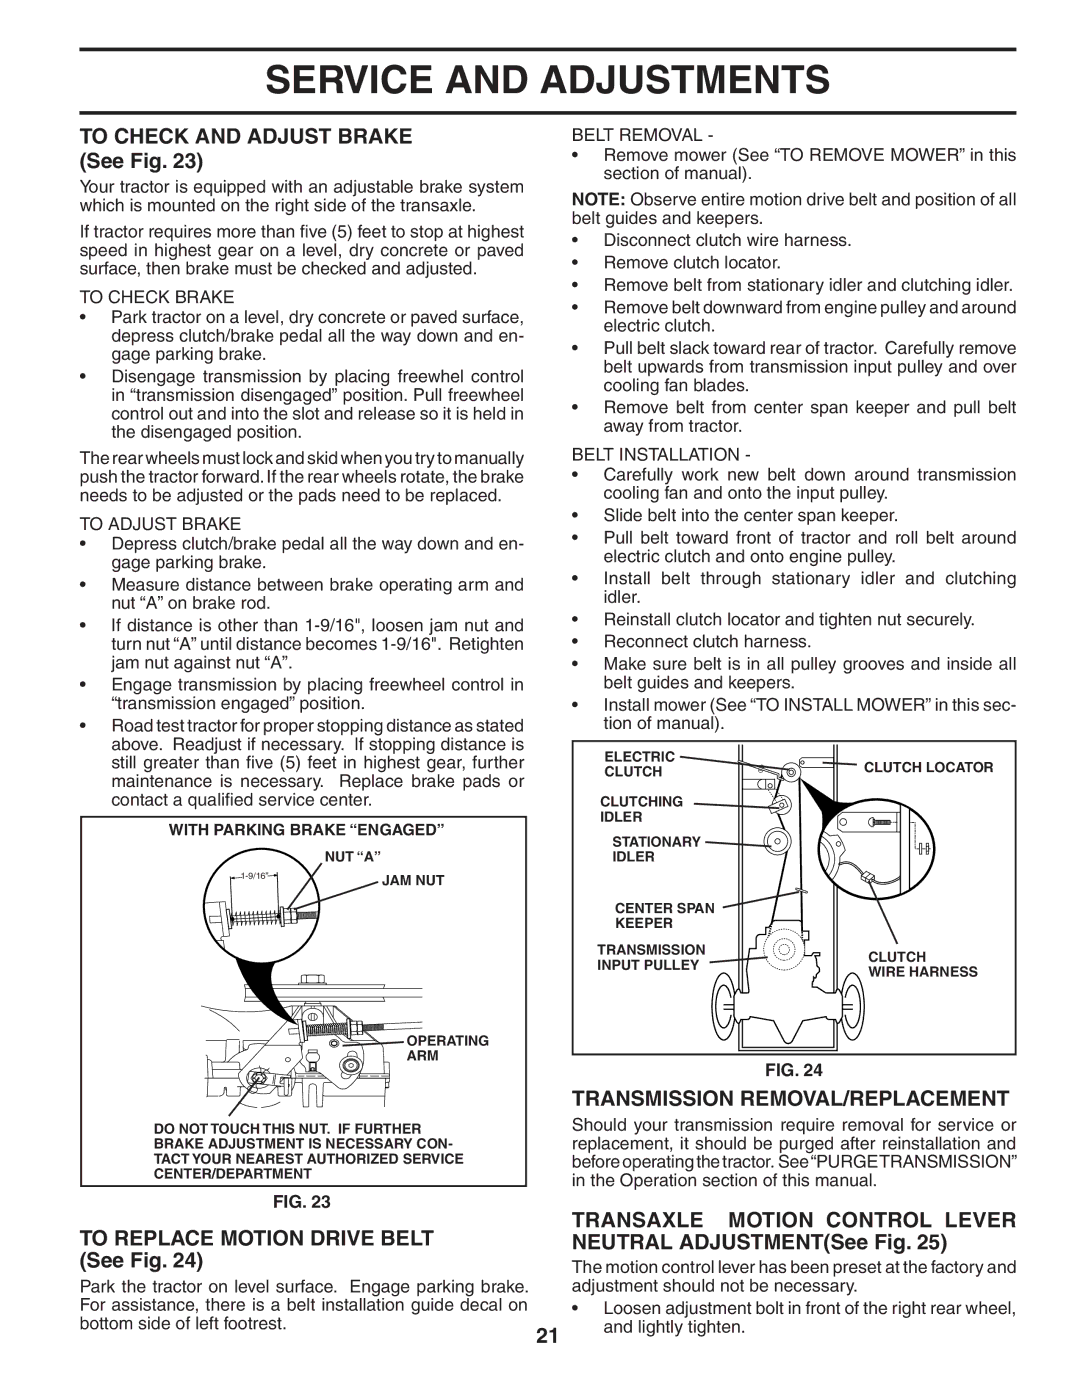 Husqvarna YTH1342XP owner manual To Check and Adjust Brake See Fig, To Replace Motion Drive Belt See Fig 